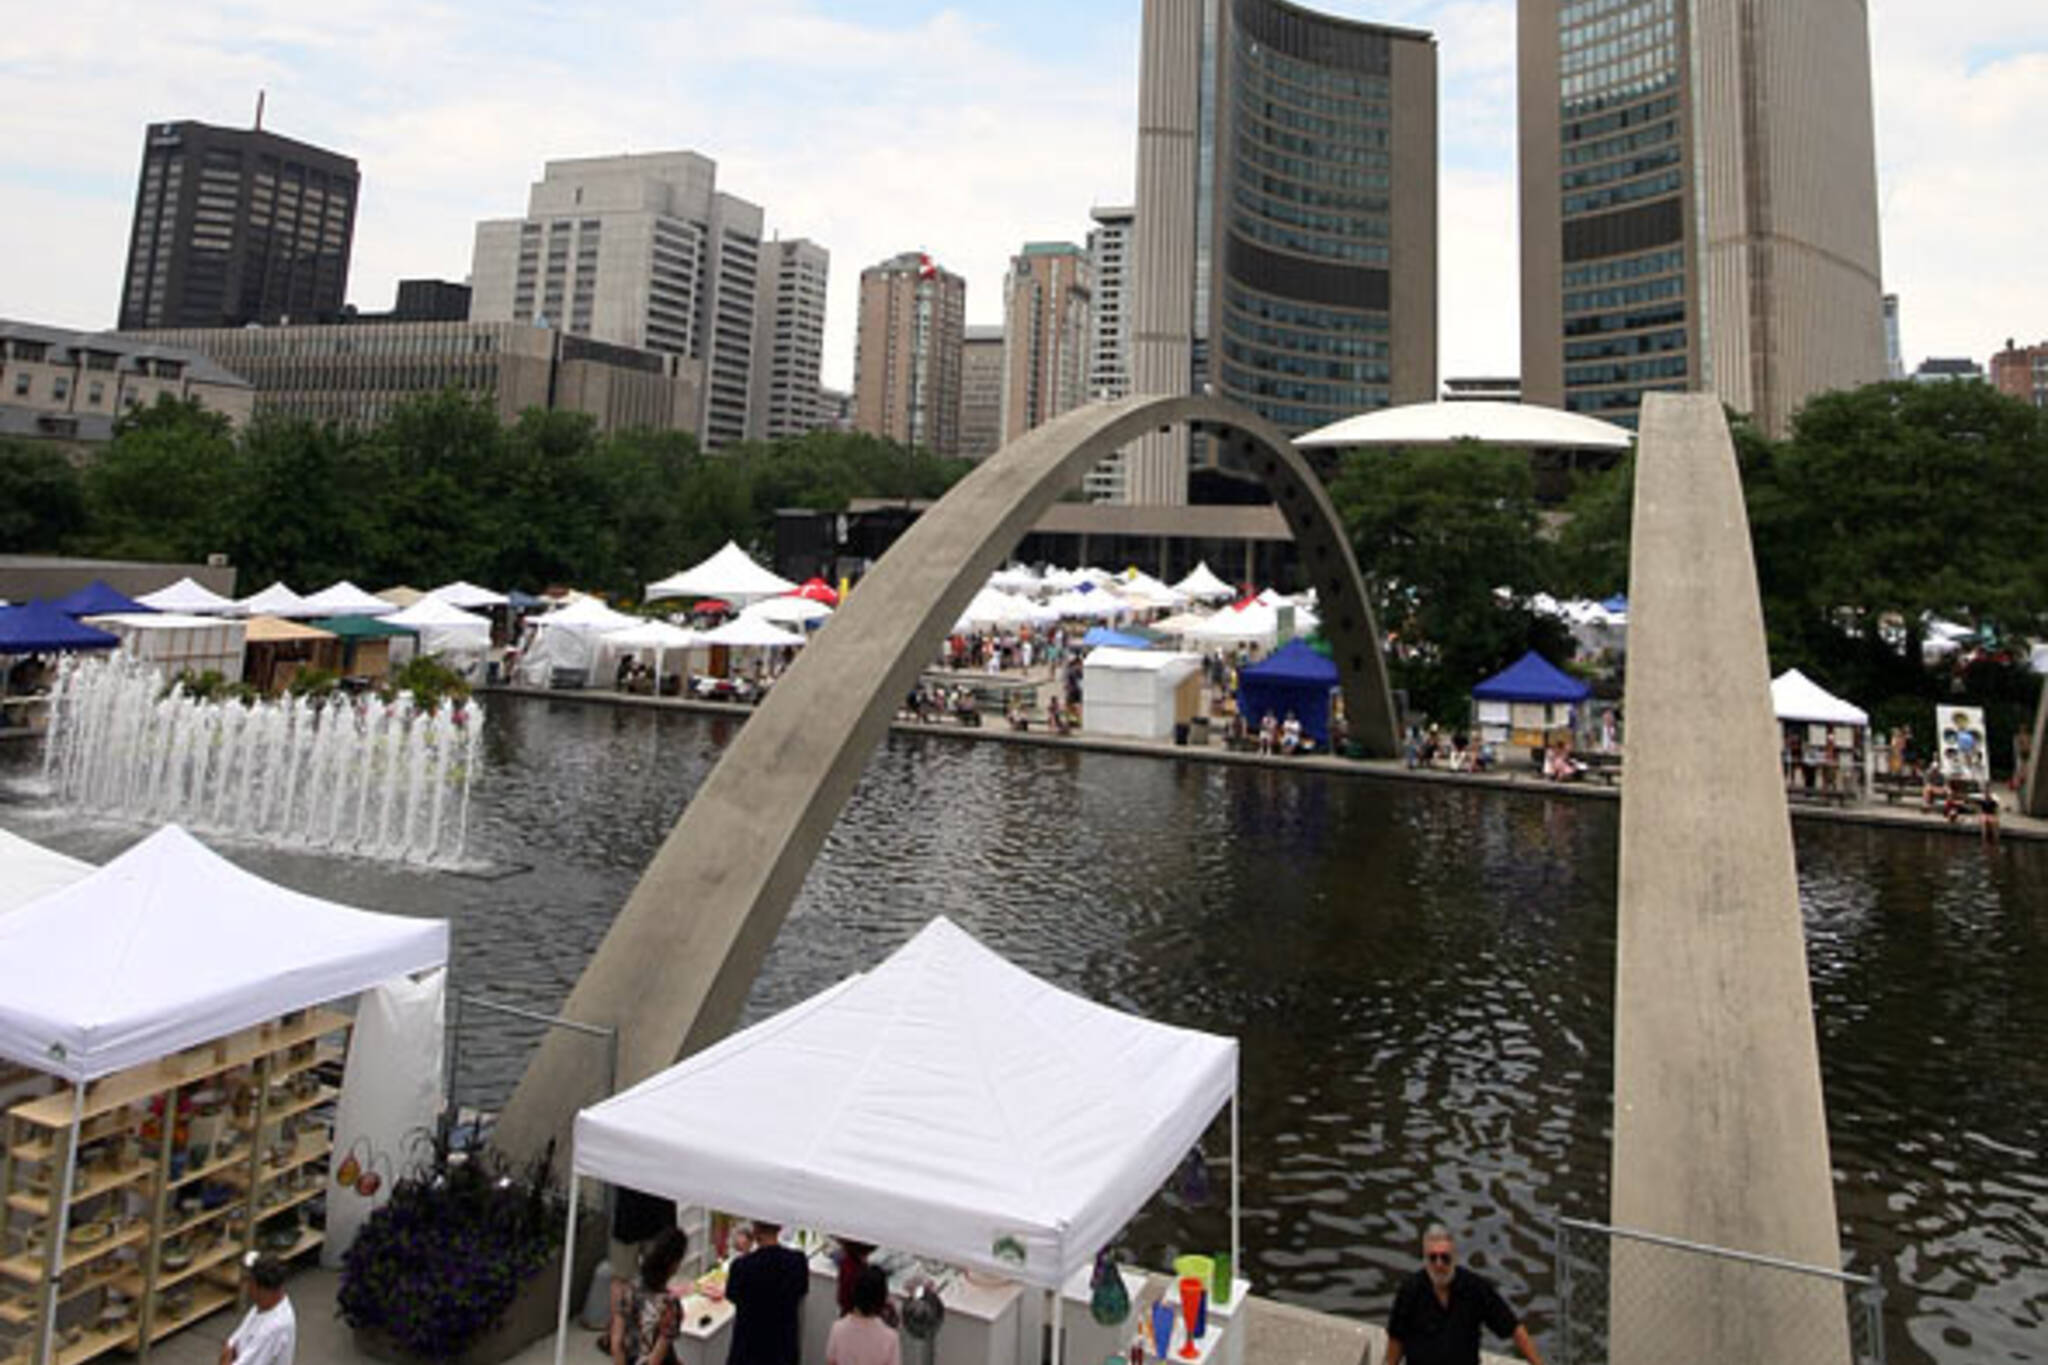 Toronto Outdoor Art Exhibition at Nathan Phillips Square